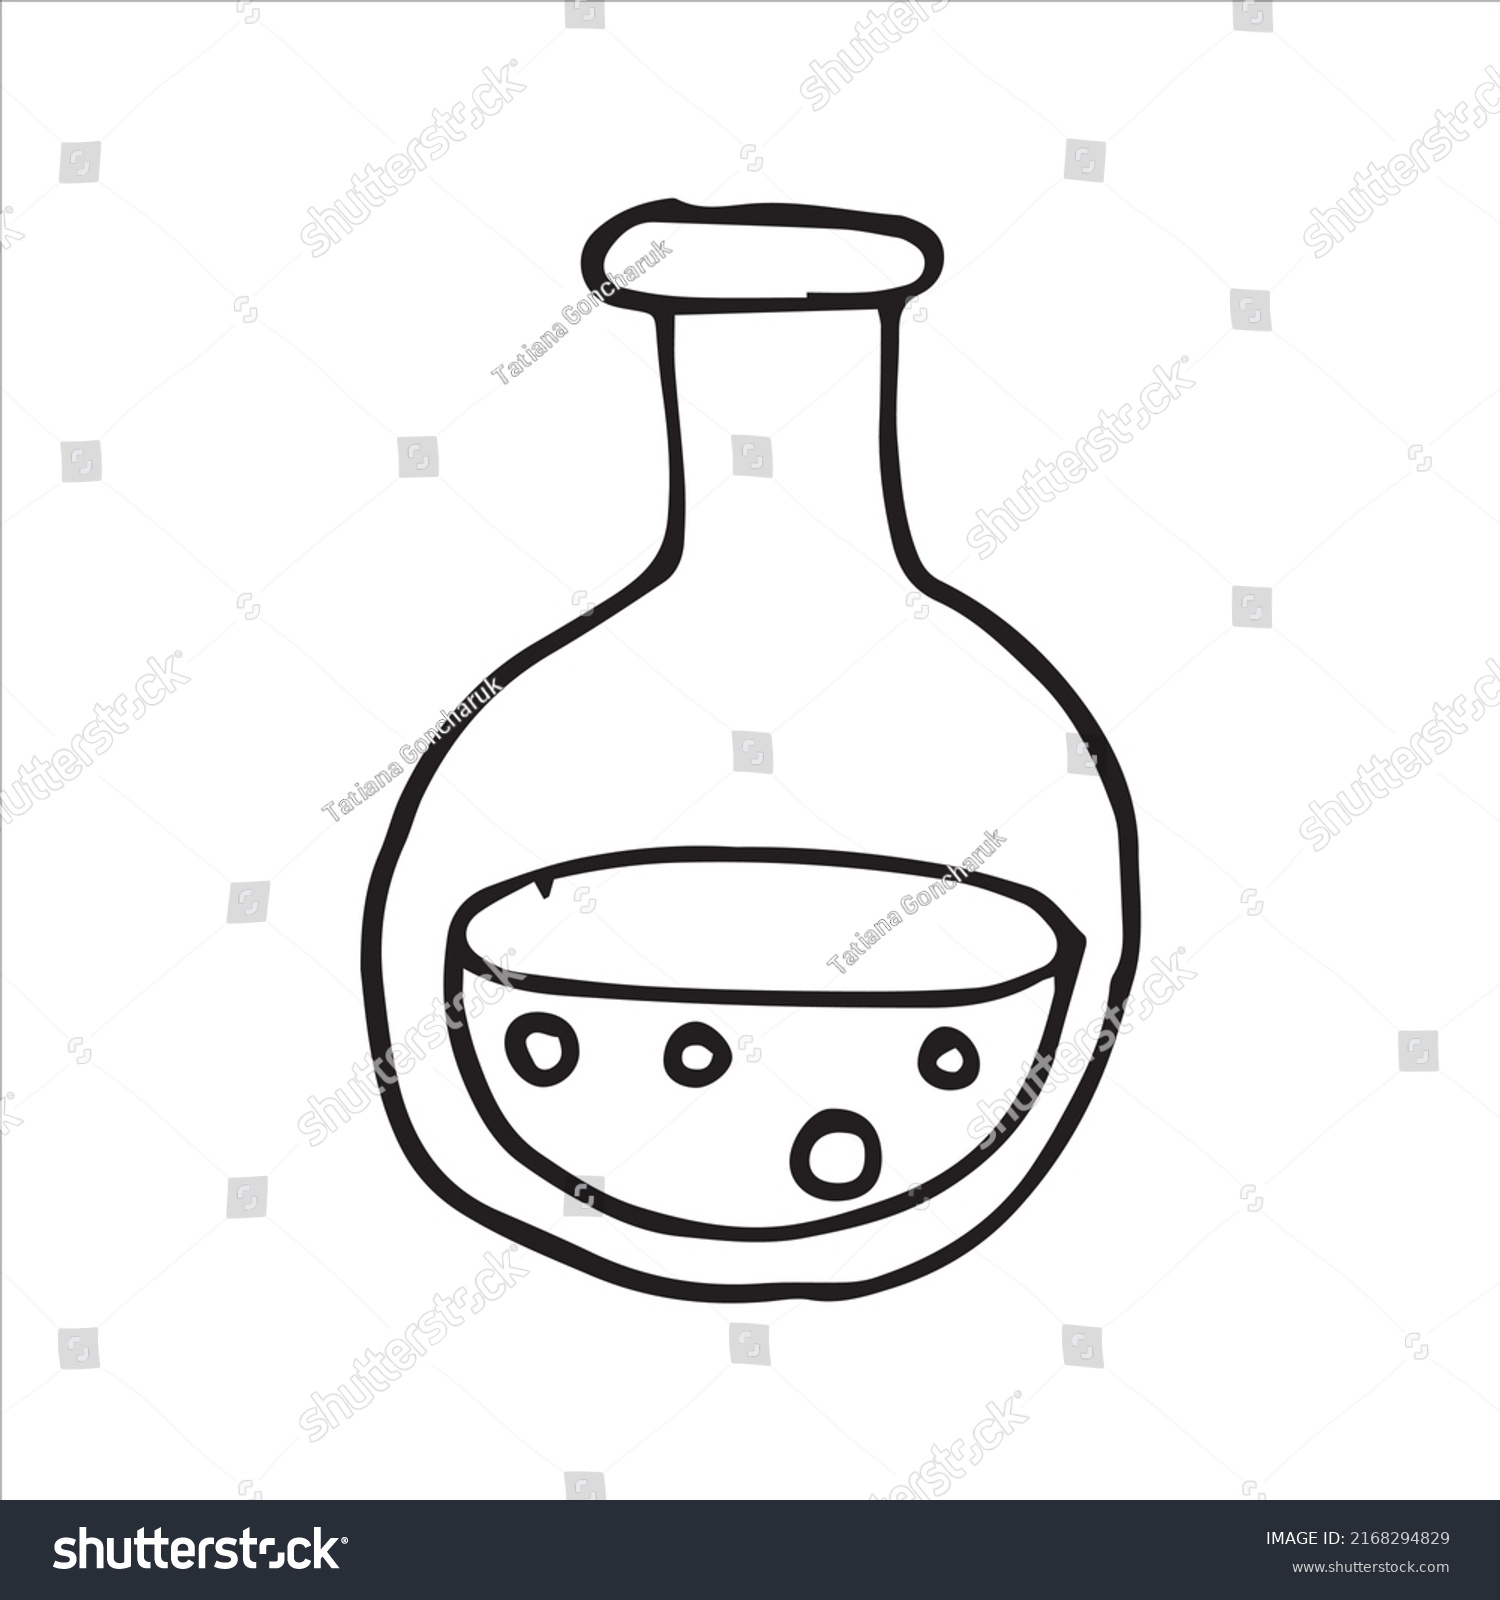 Vector Drawing Doodle Style Chemical Flasks Stock Vector (Royalty Free ...